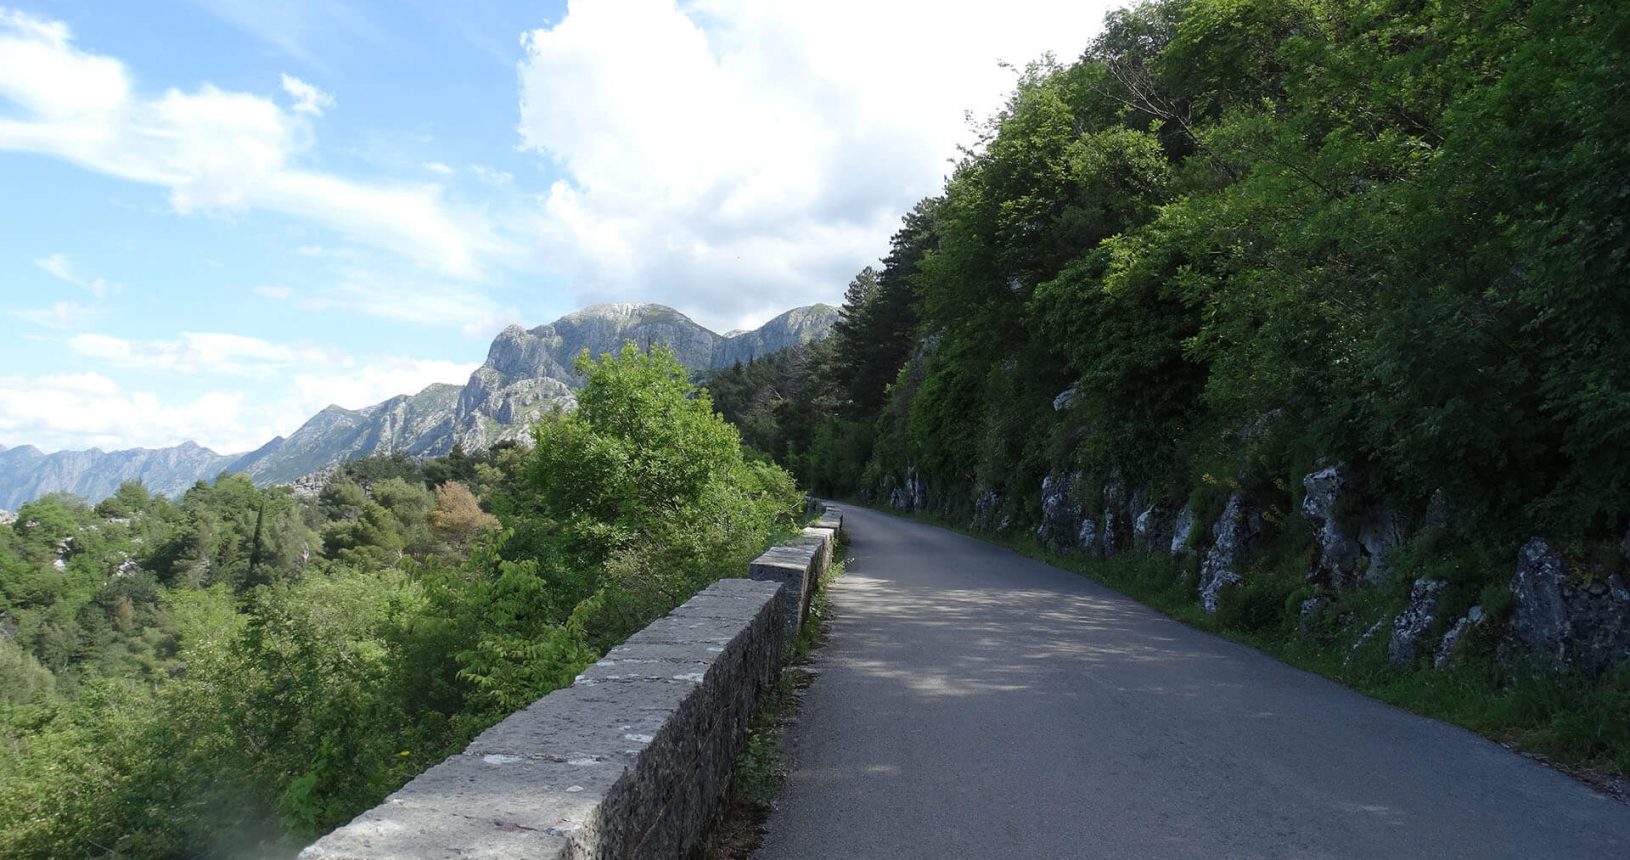 The road to Lovcen national park